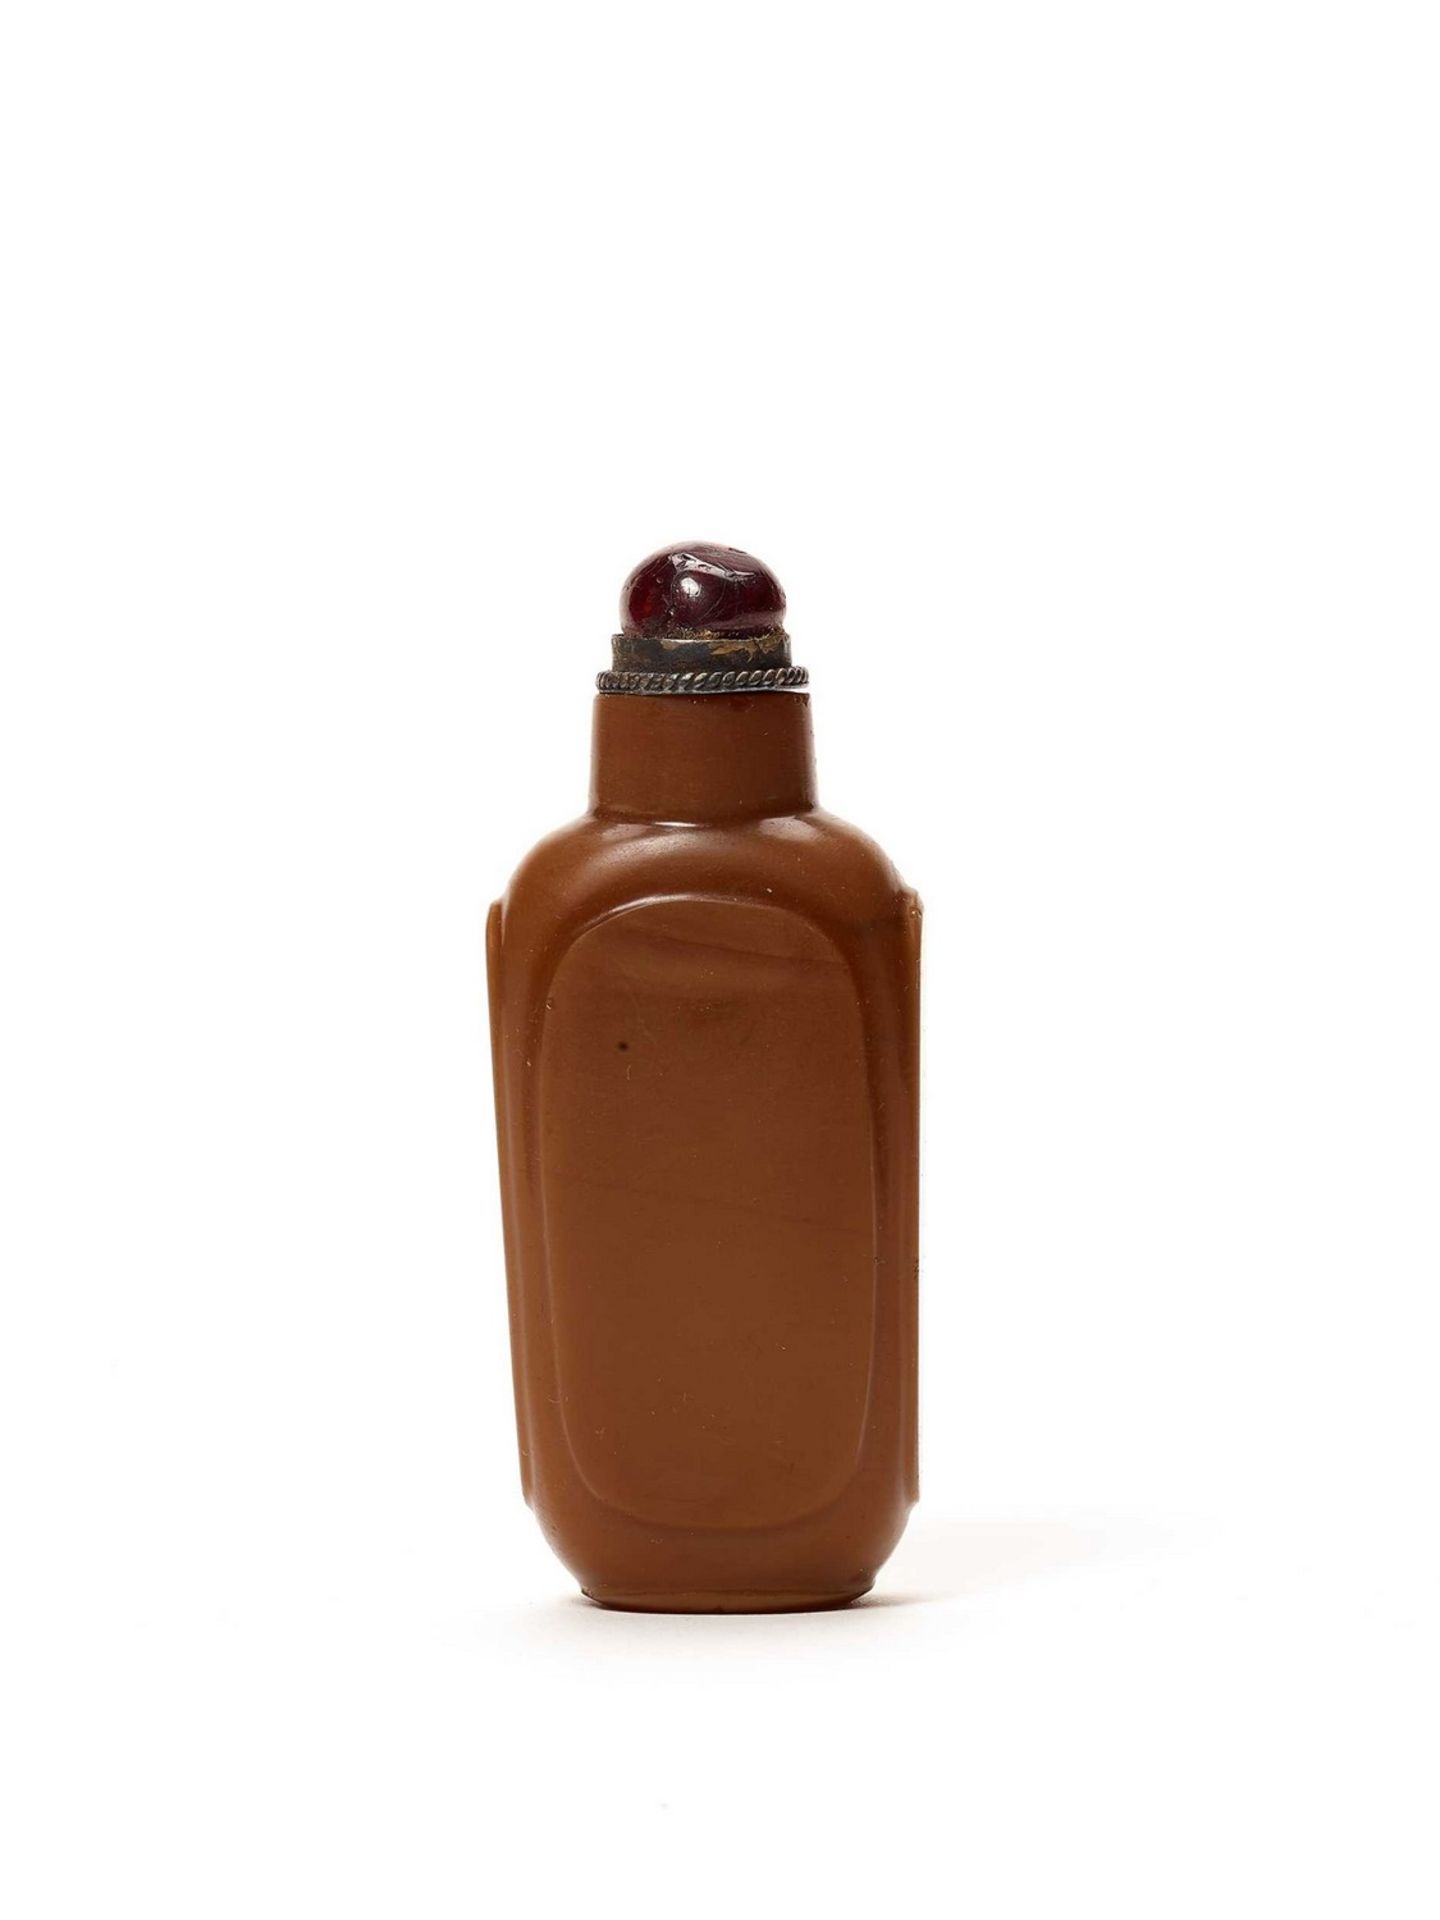 AN OPAQUE BROWN GLASS SNUFF BOTTLE, QING DYNASTY - Image 2 of 4